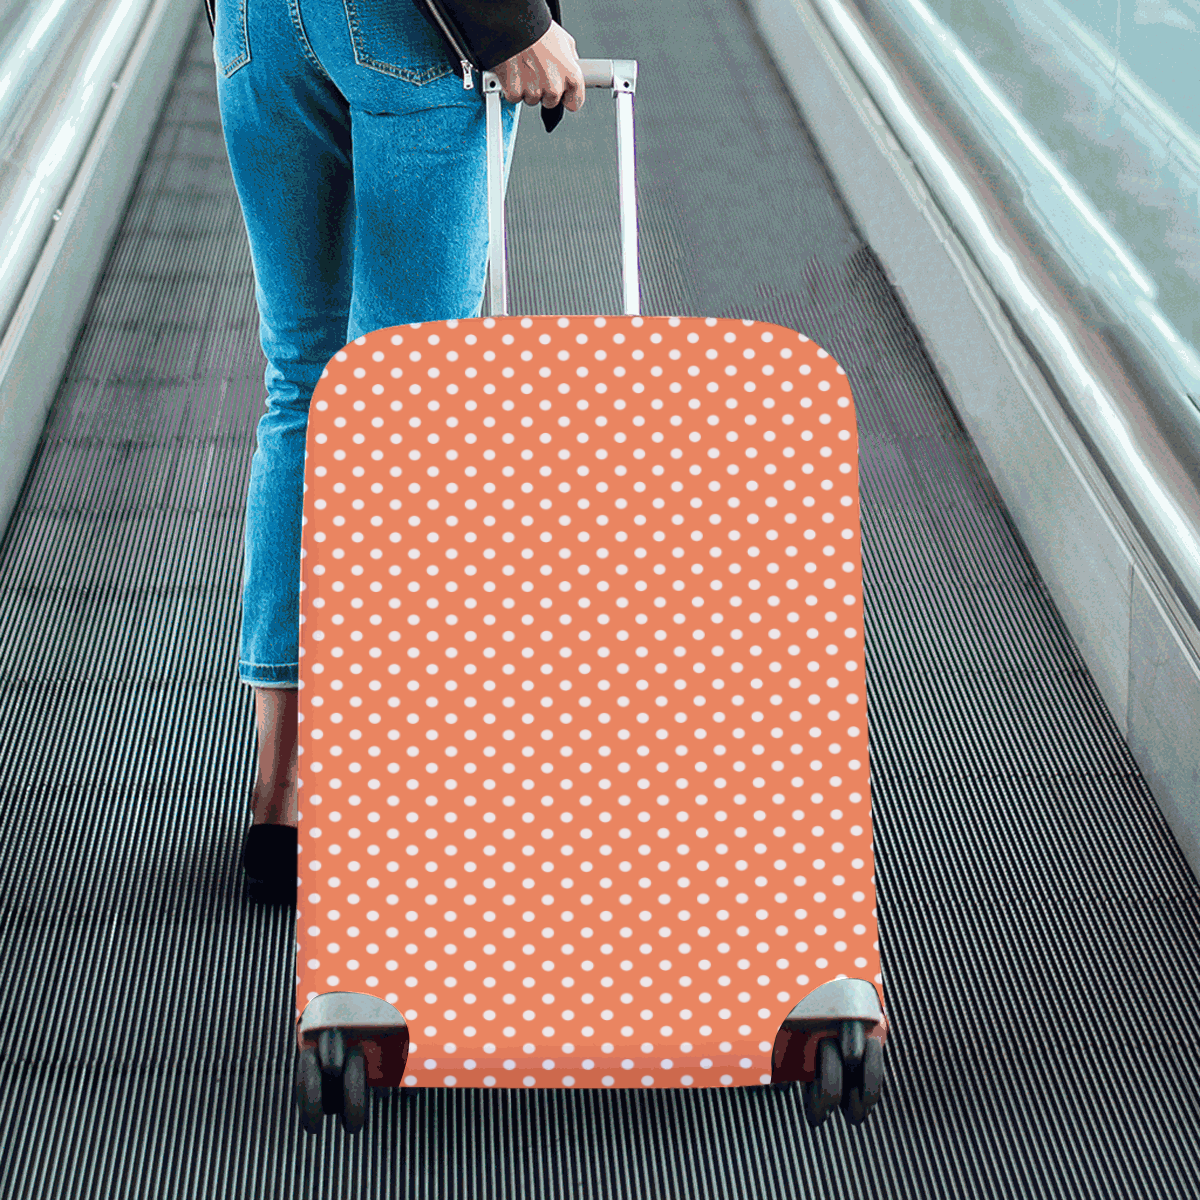 Appricot polka dots Luggage Cover/Large 26"-28"